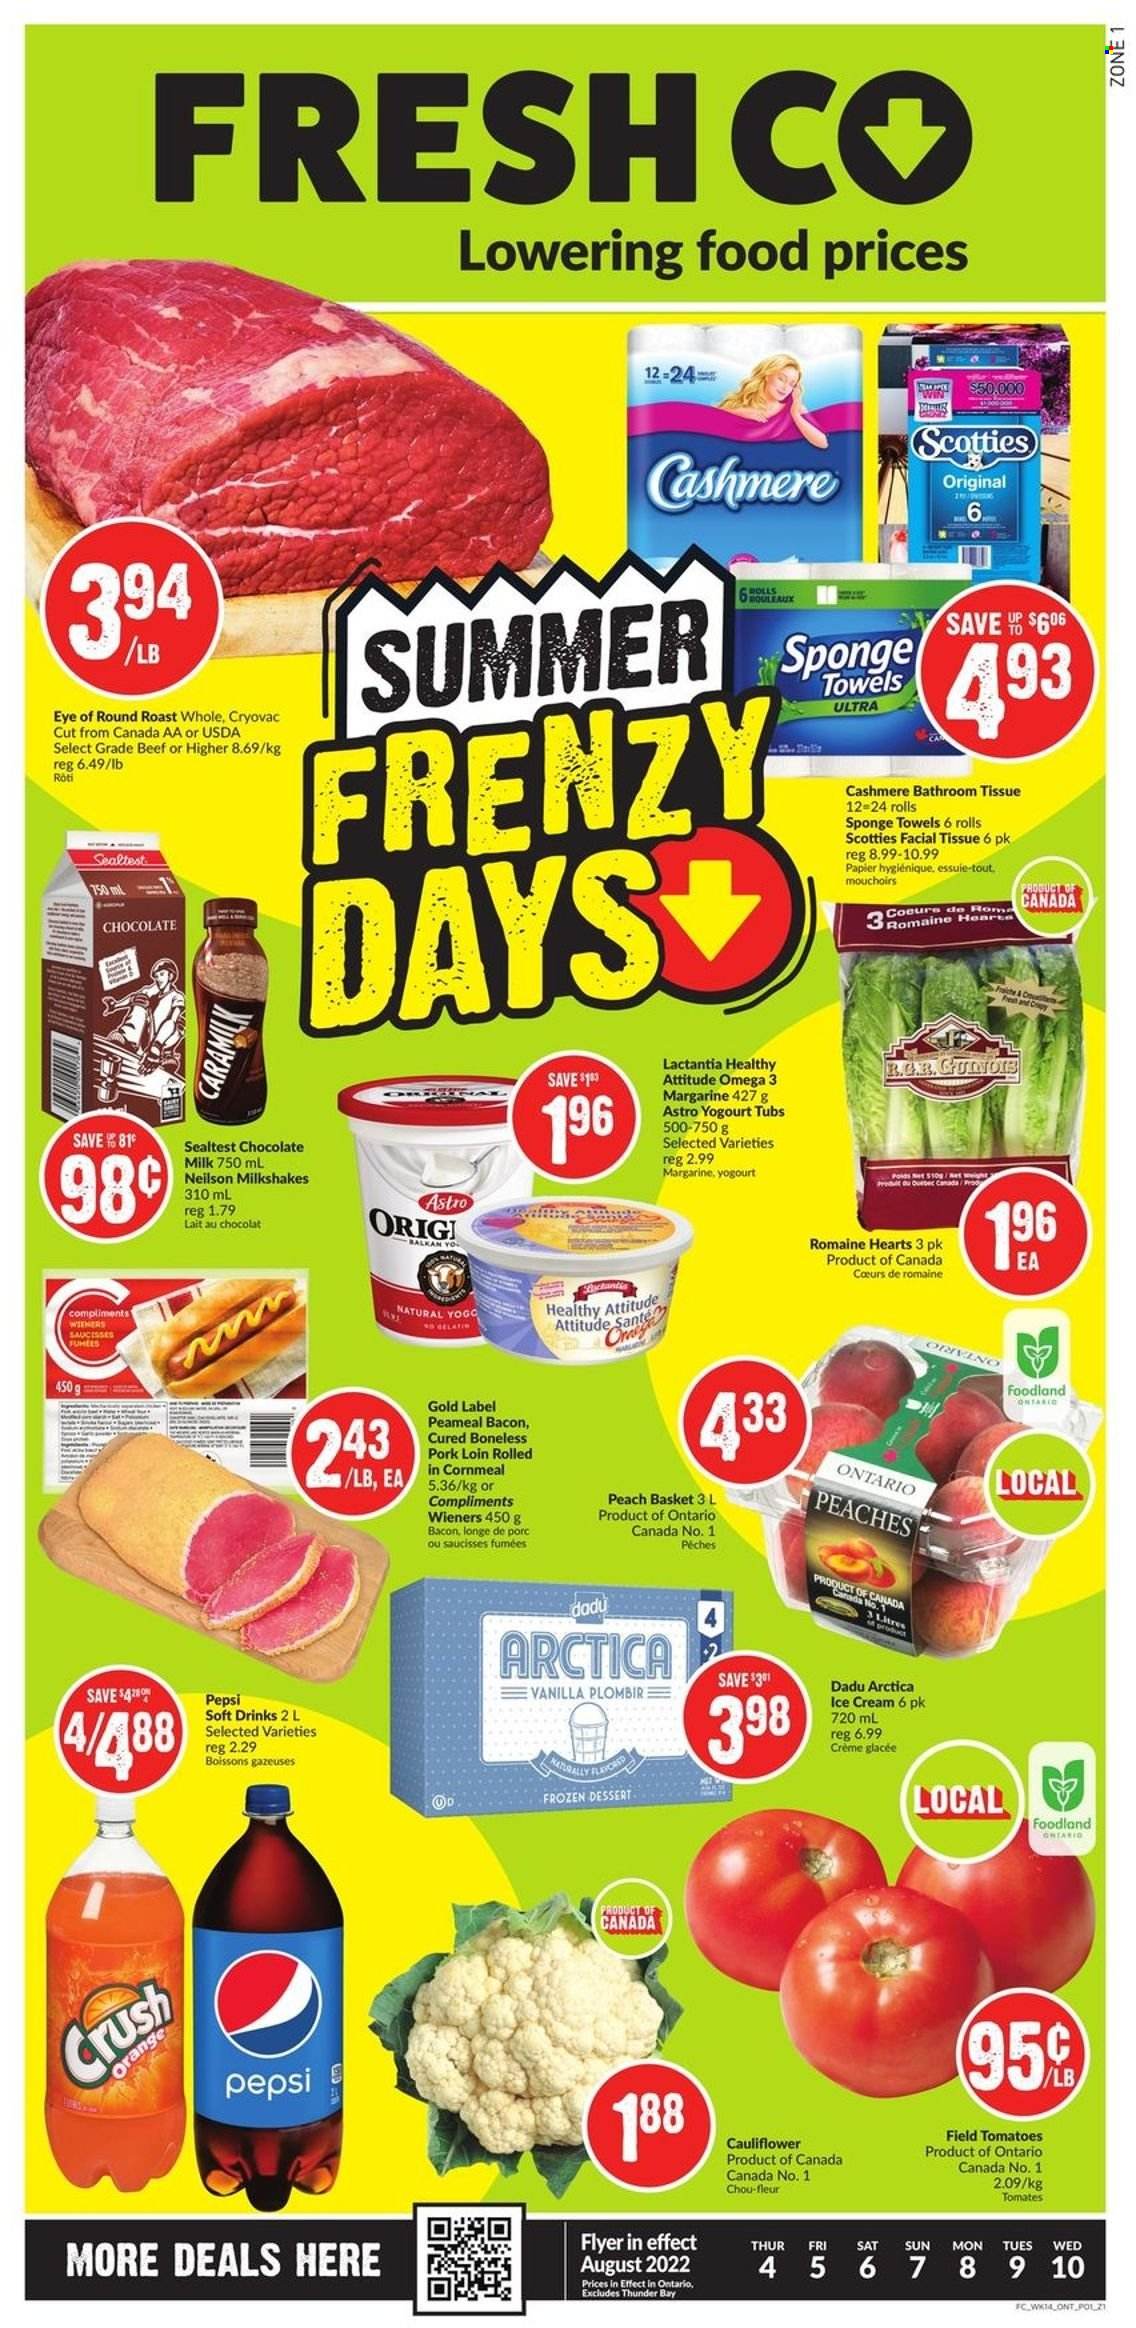 FreshCo. flyer  - August 04, 2022 - August 10, 2022. Page 1.